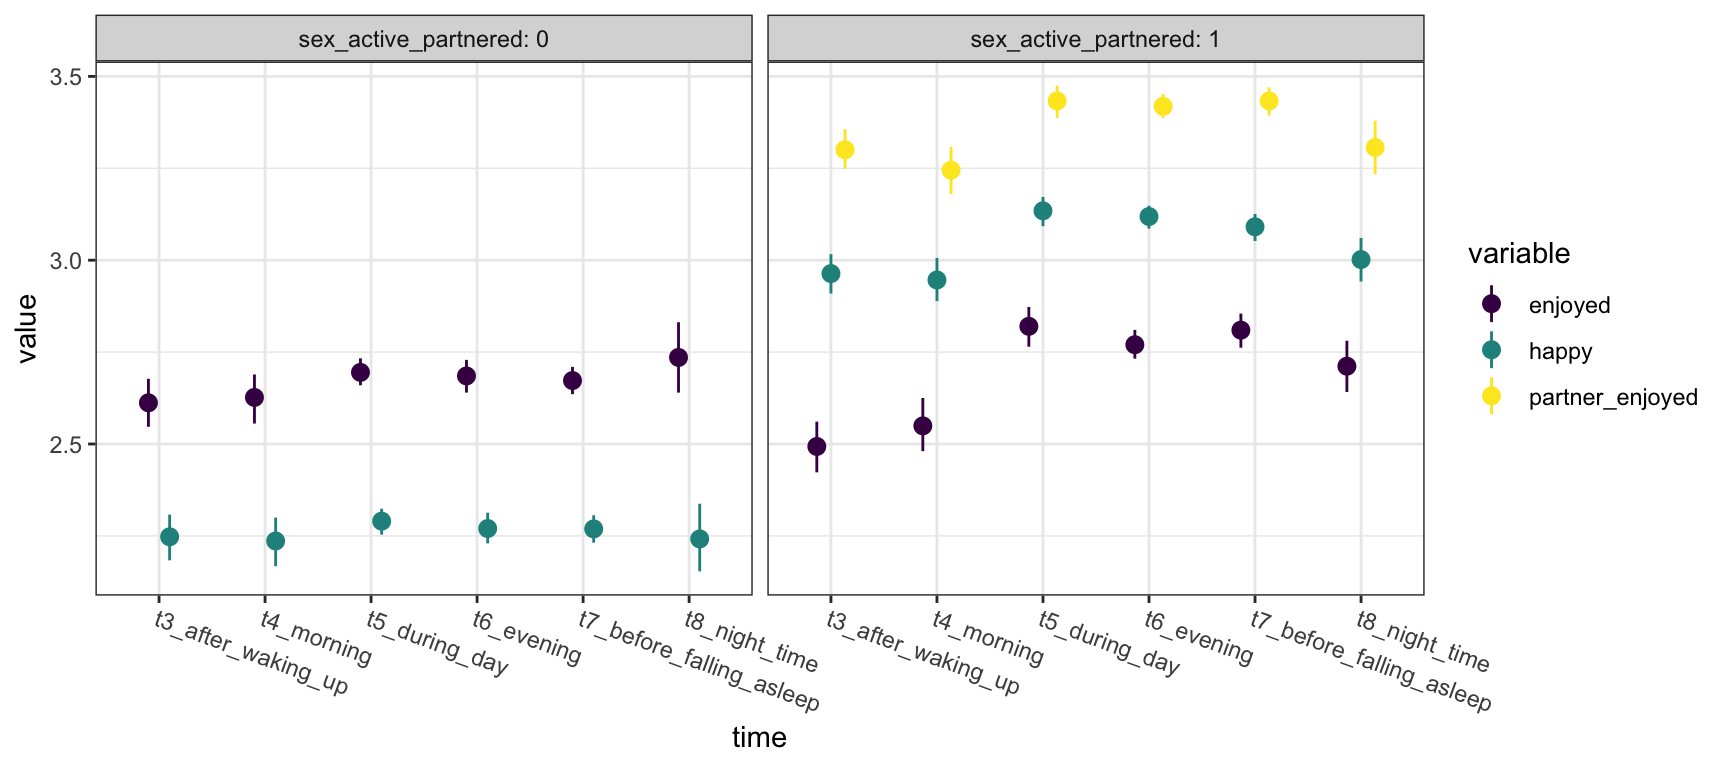 Women's own satisfaction and happiness and their partner's satisfaction as a function of time of day. The scale went from 0 [not at all] to 4 [very much so].